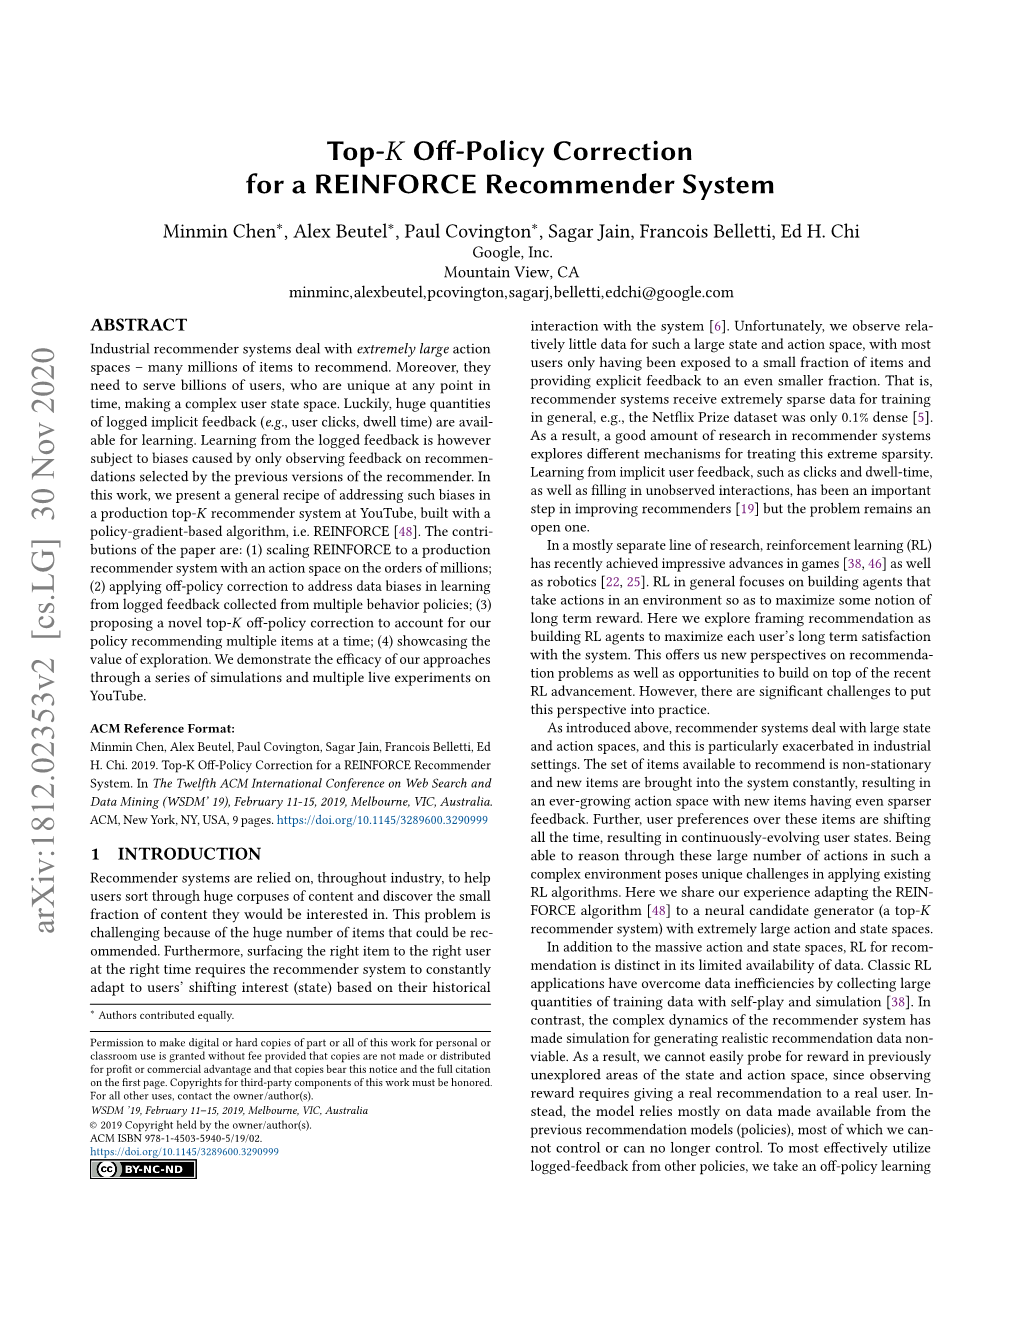 Top-K Off-Policy Correctionfor a REINFORCE Recommender System